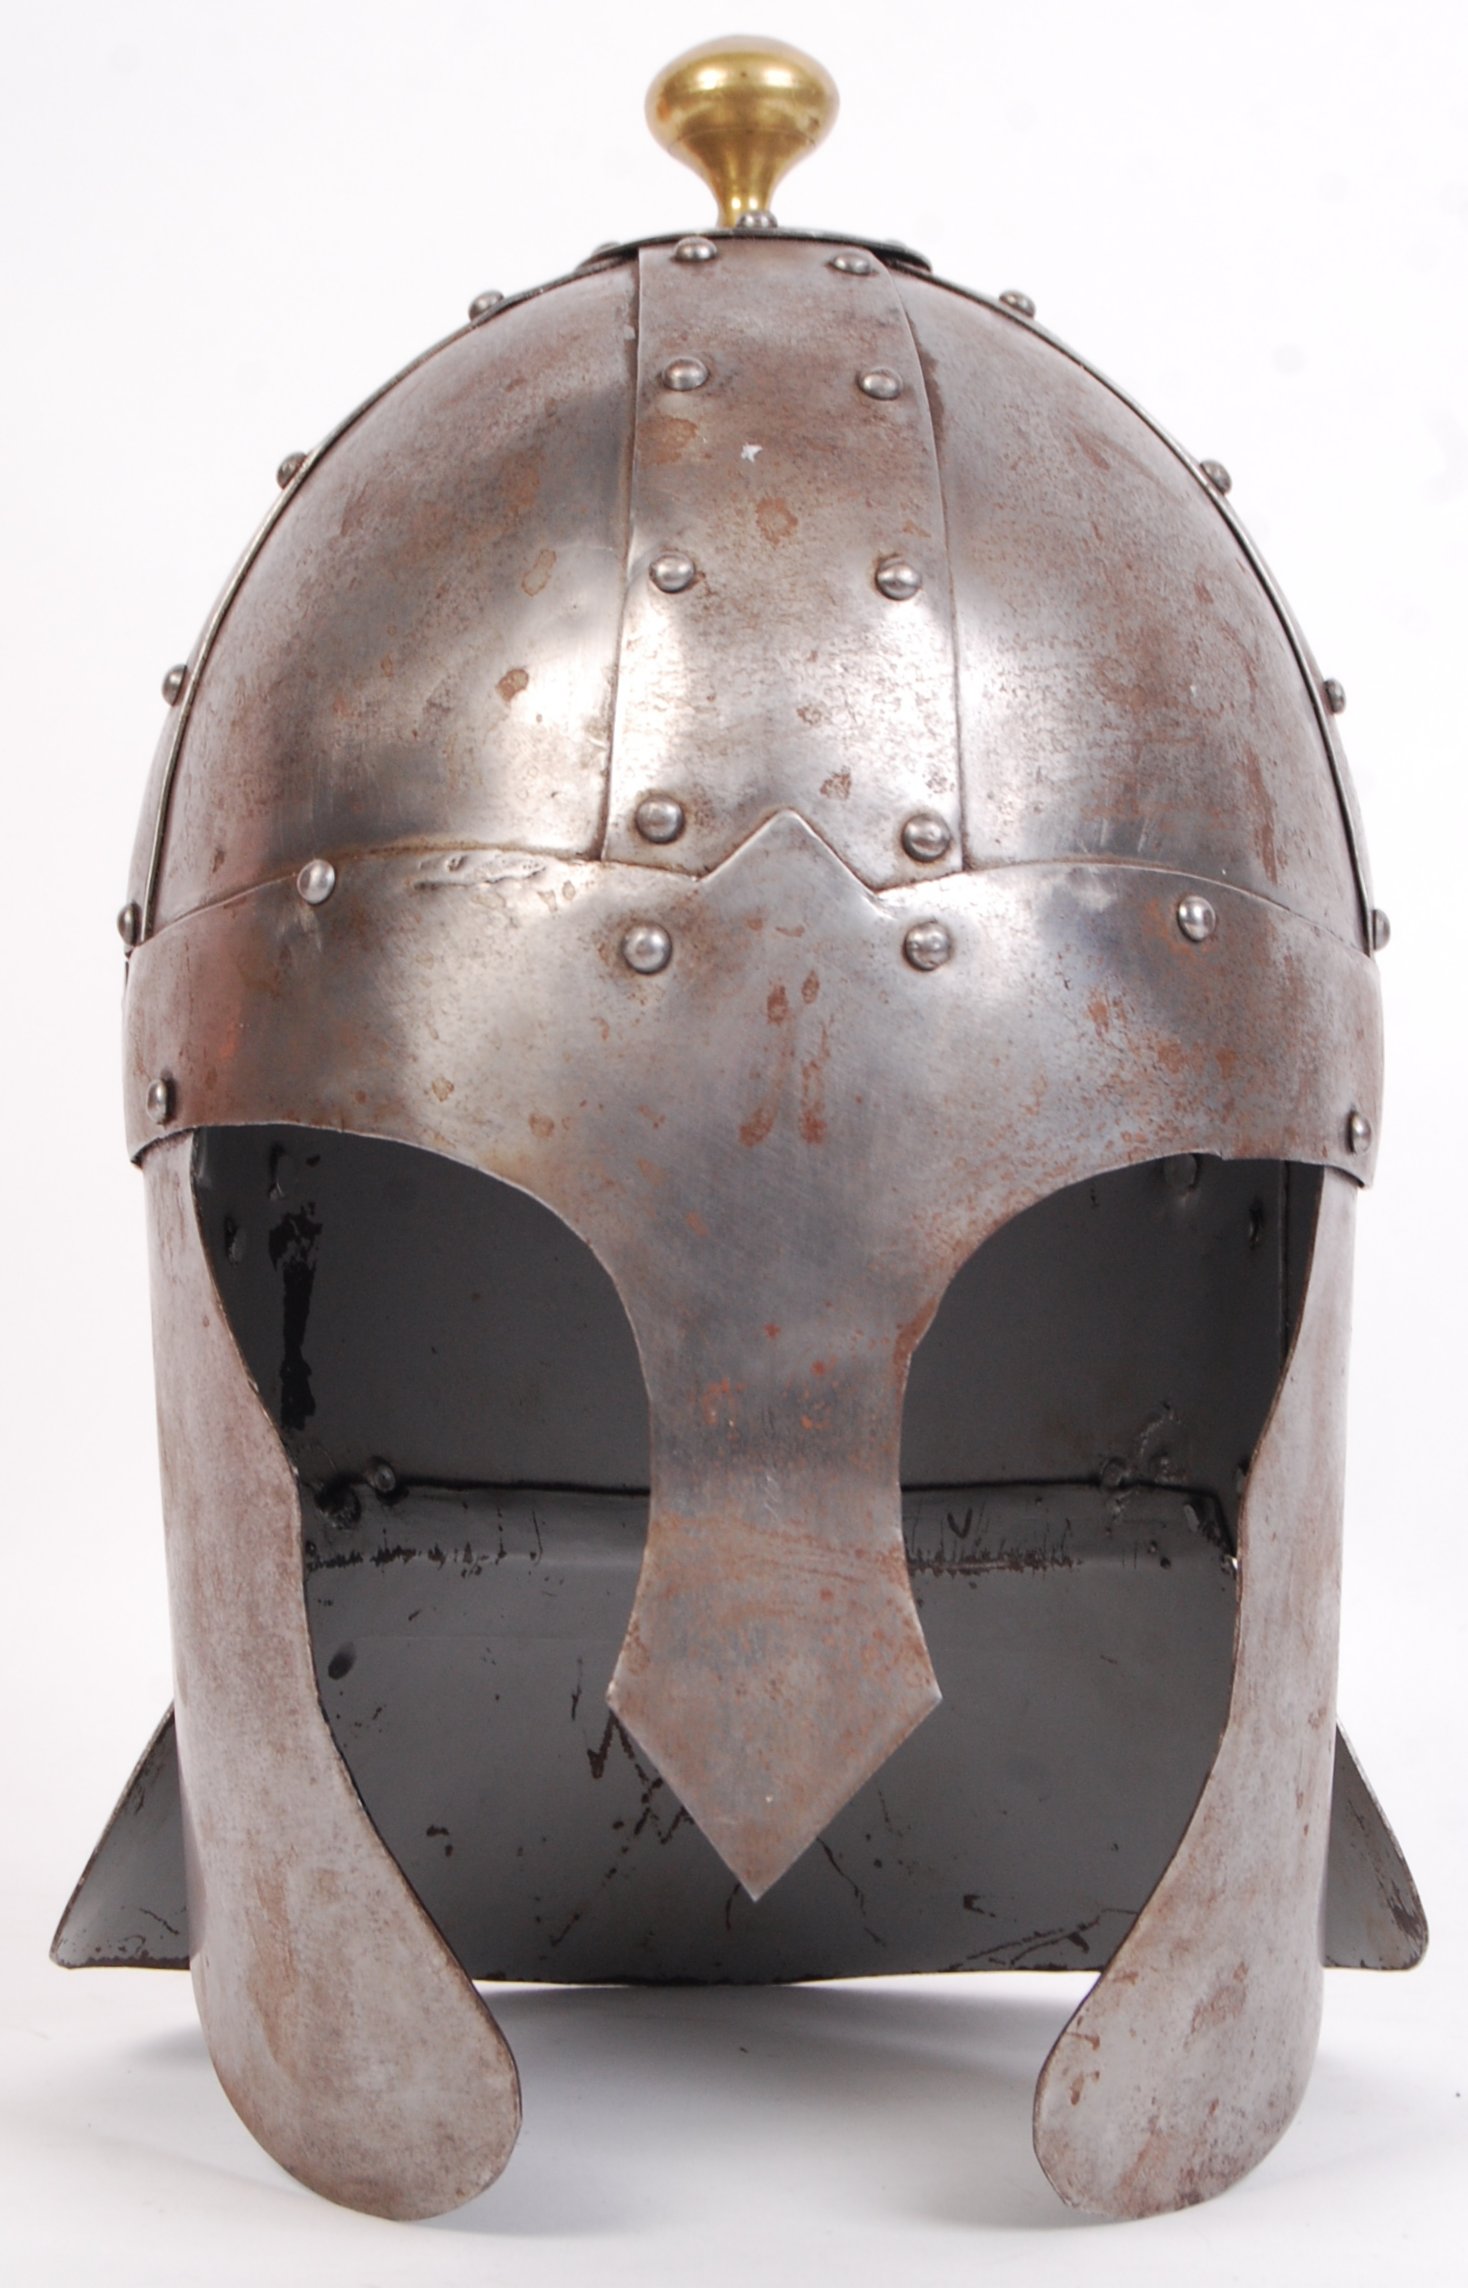 ANTIQUE STYLE KNIGHT'S SUIT OF ARMOUR HELMET